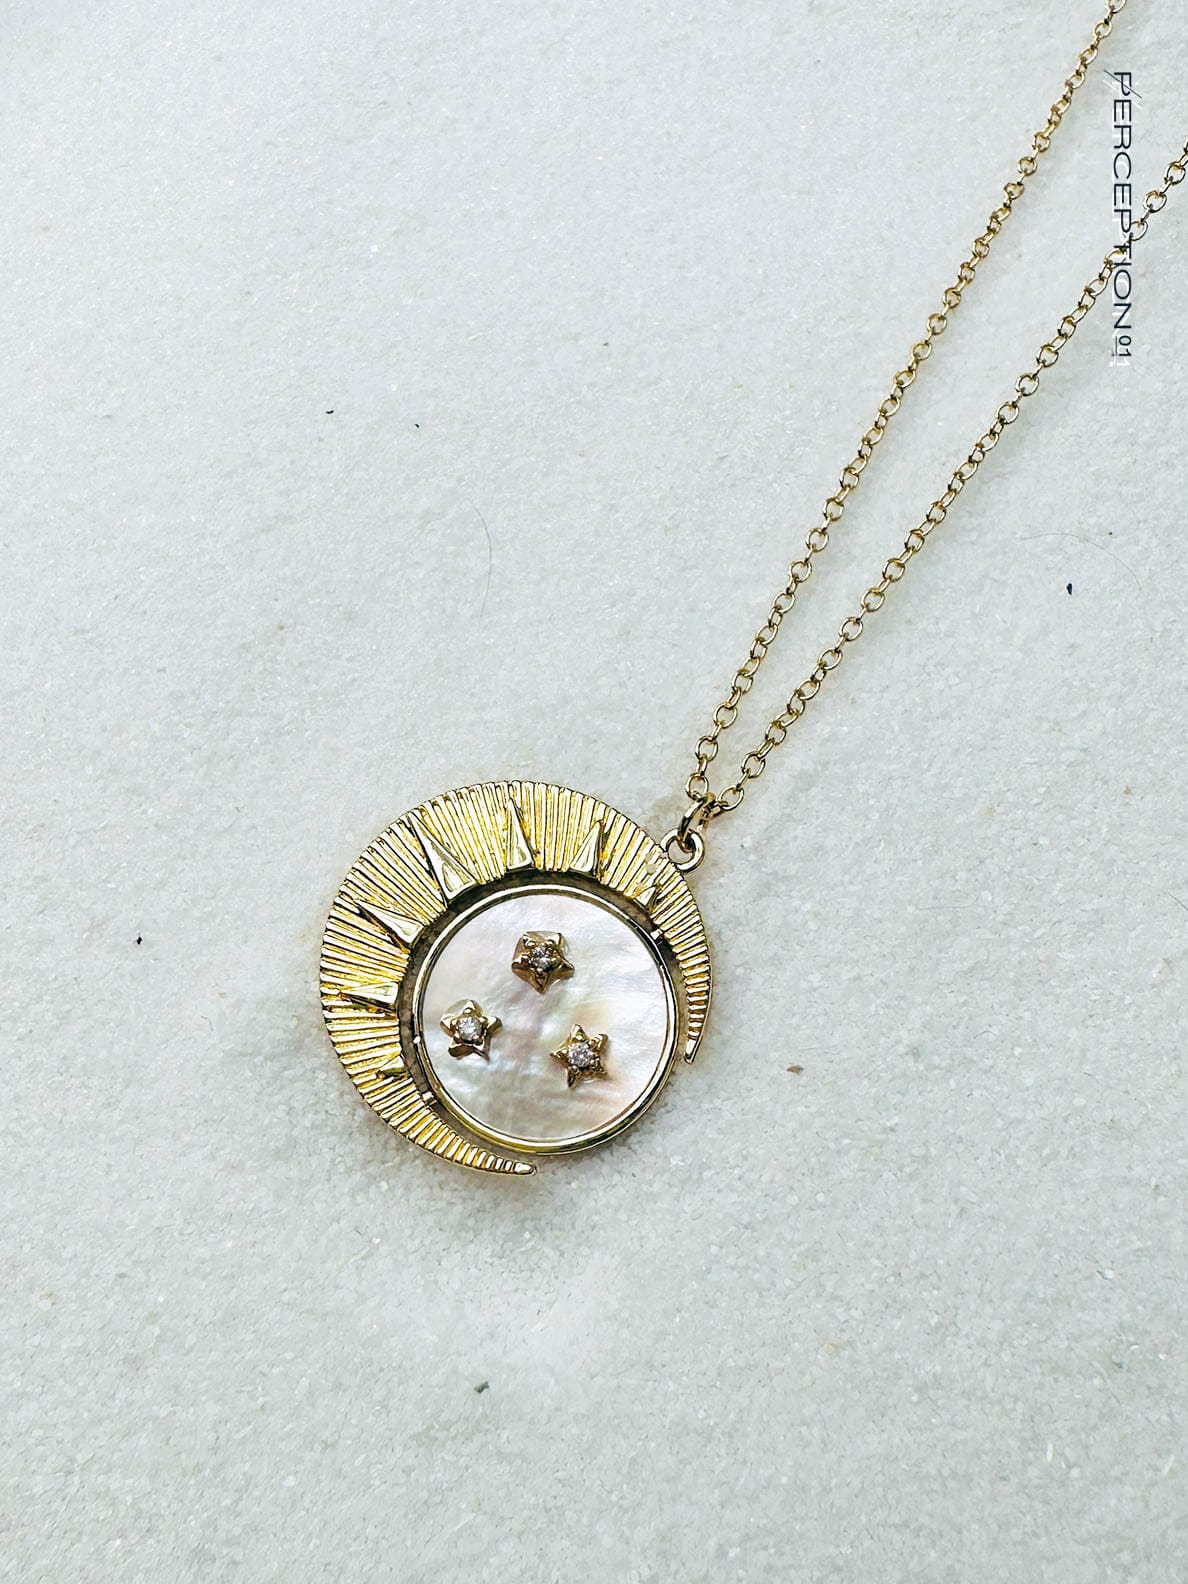 Gold Moon & Mother of Pearl Stars Charm Necklace - Perception0one.com